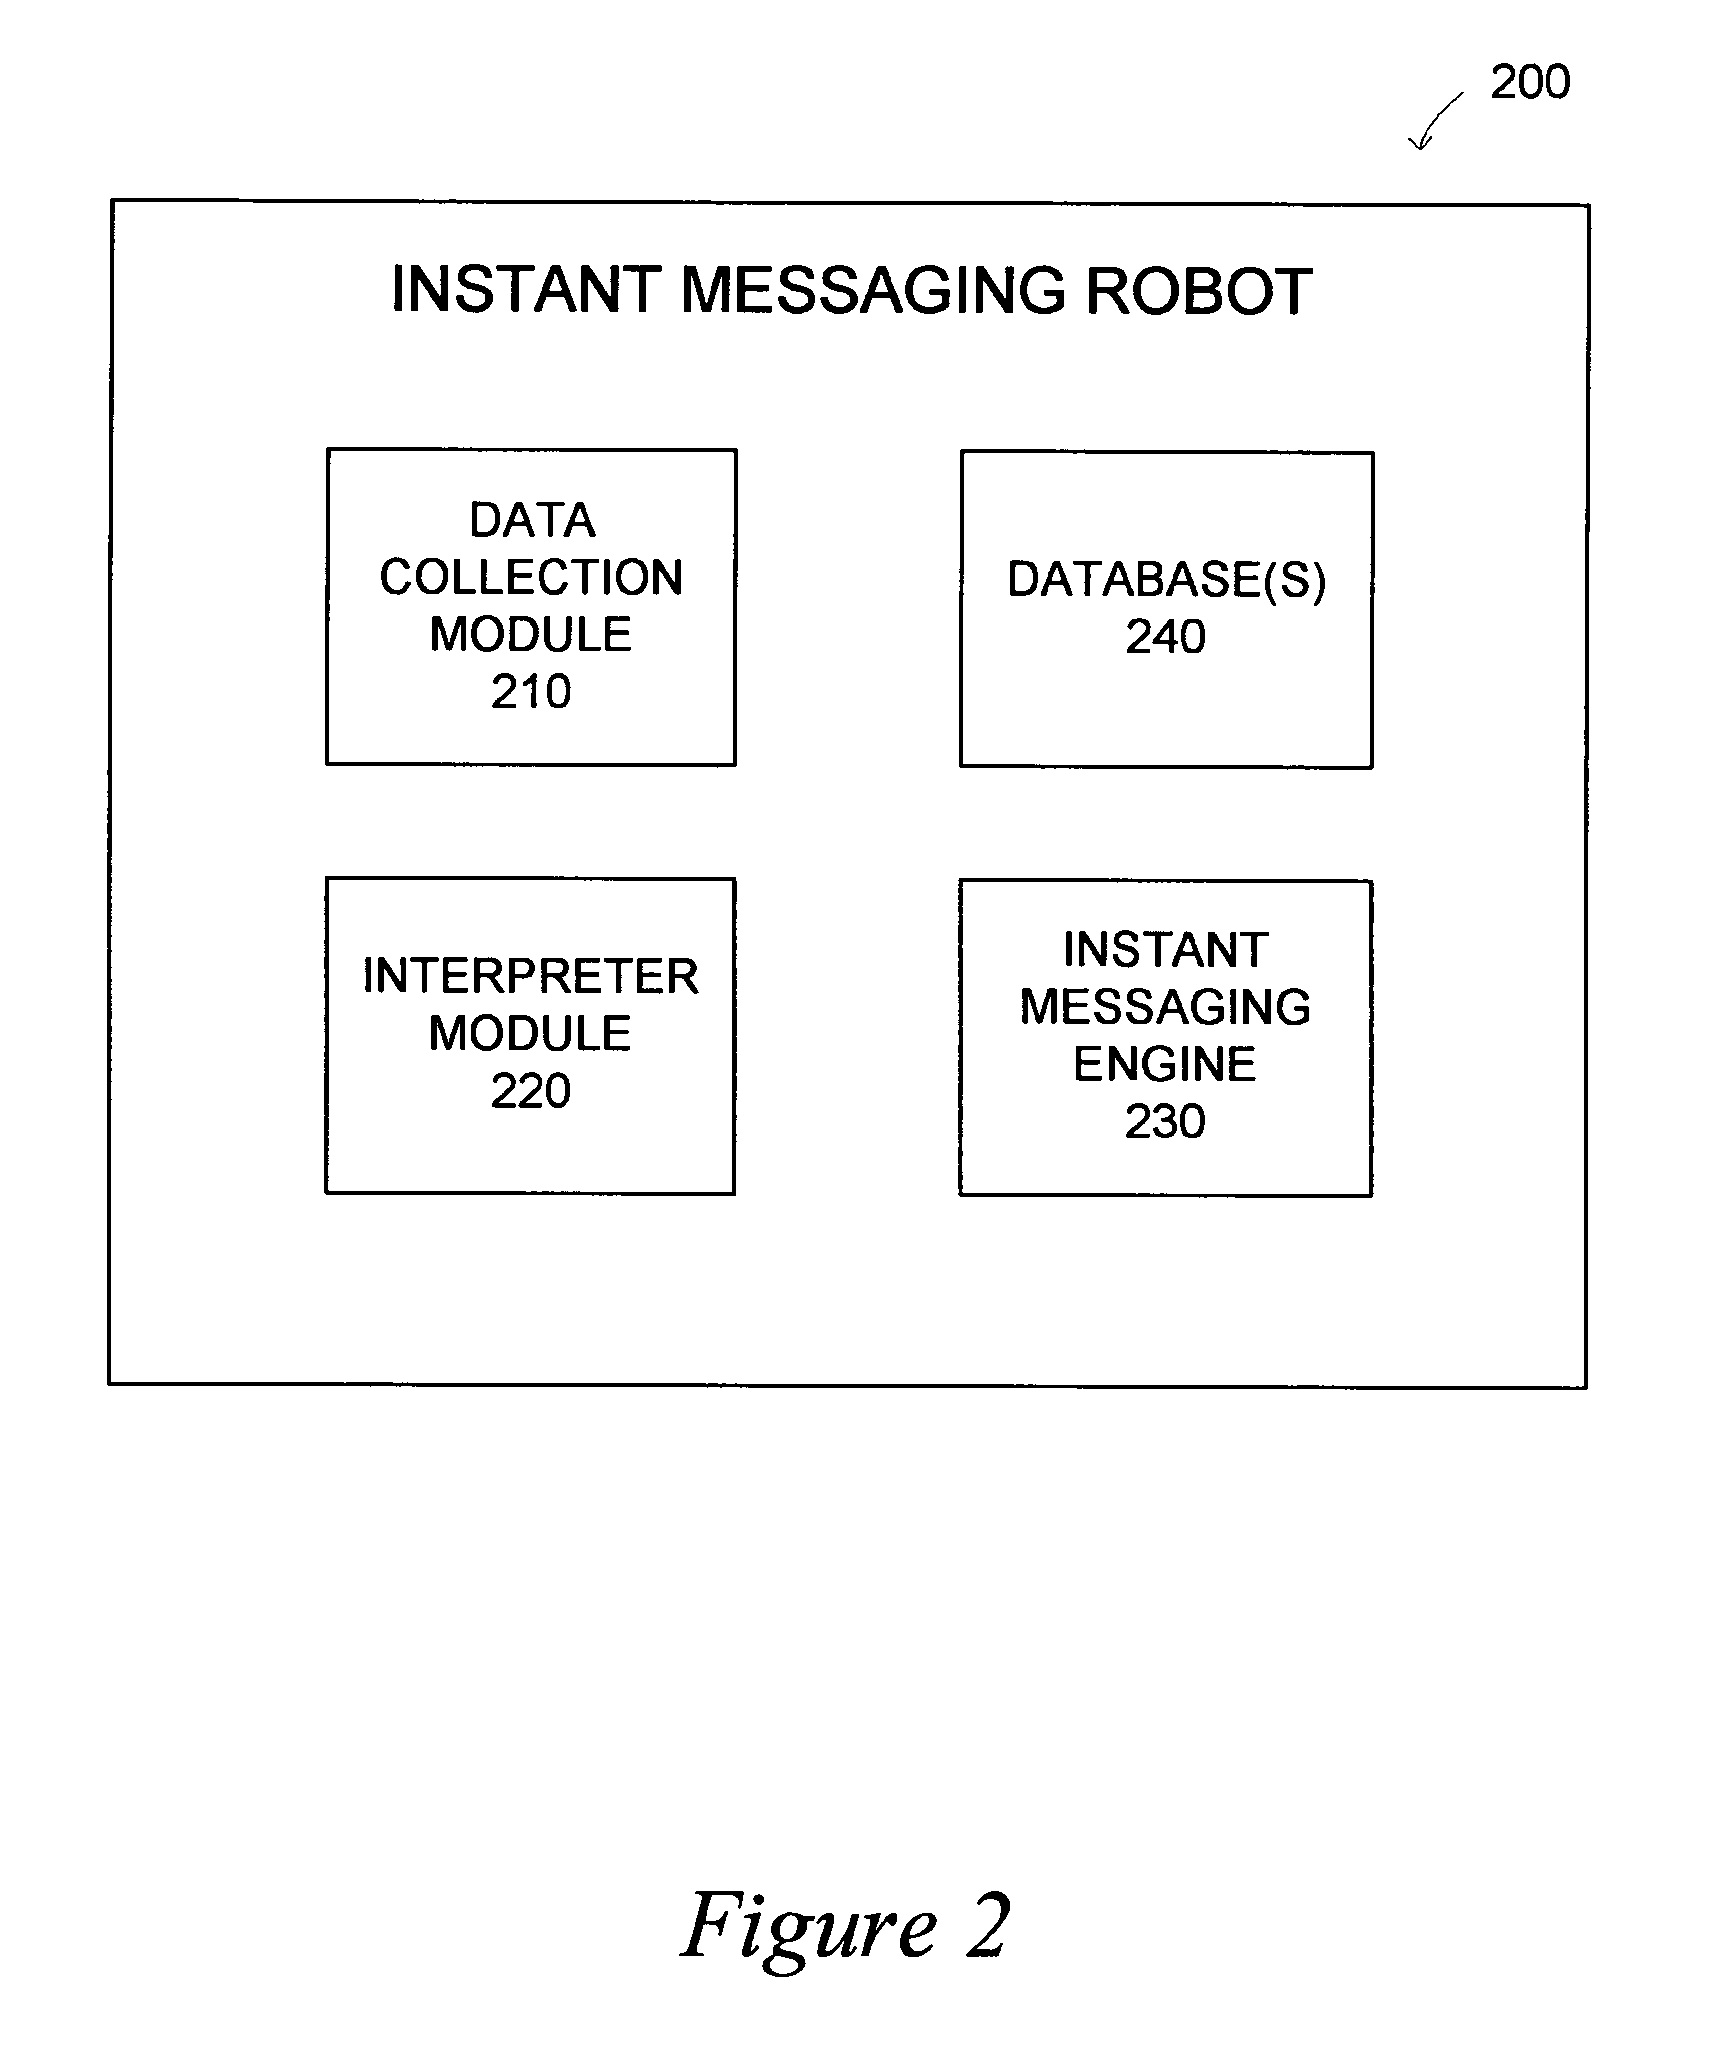 Instant messaging robot to provide product information